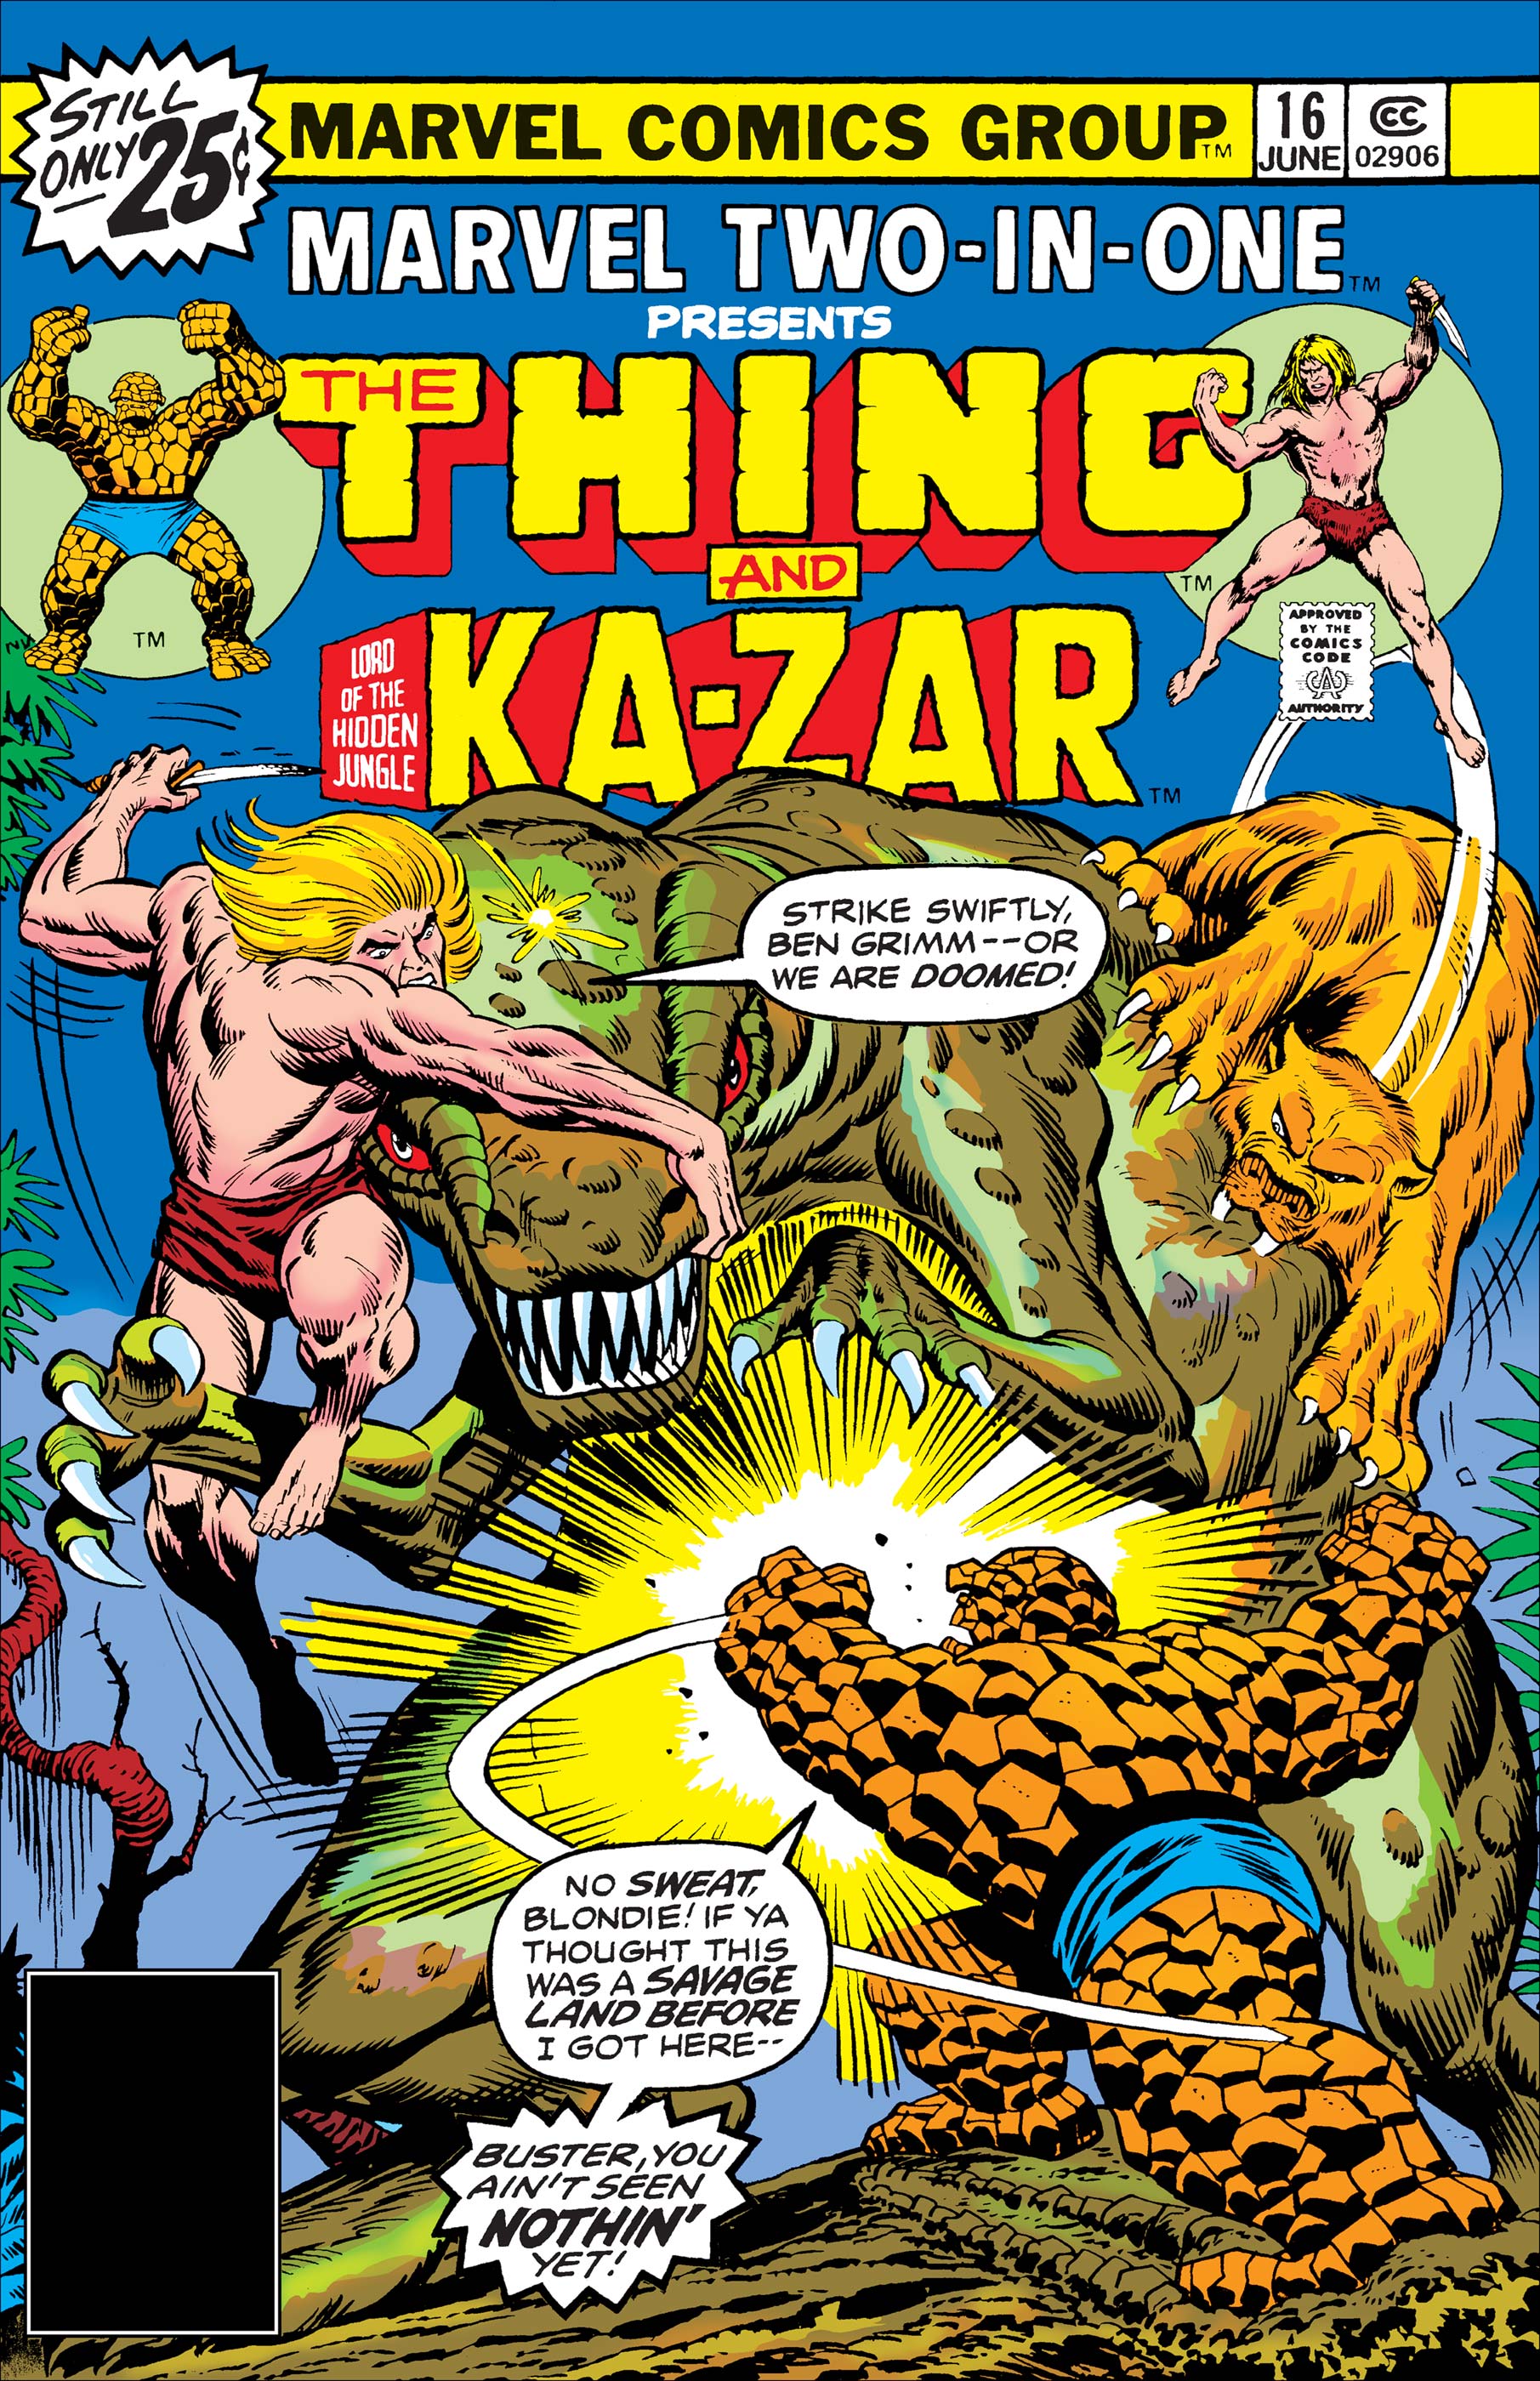 Marvel Two-in-One (1974) #16